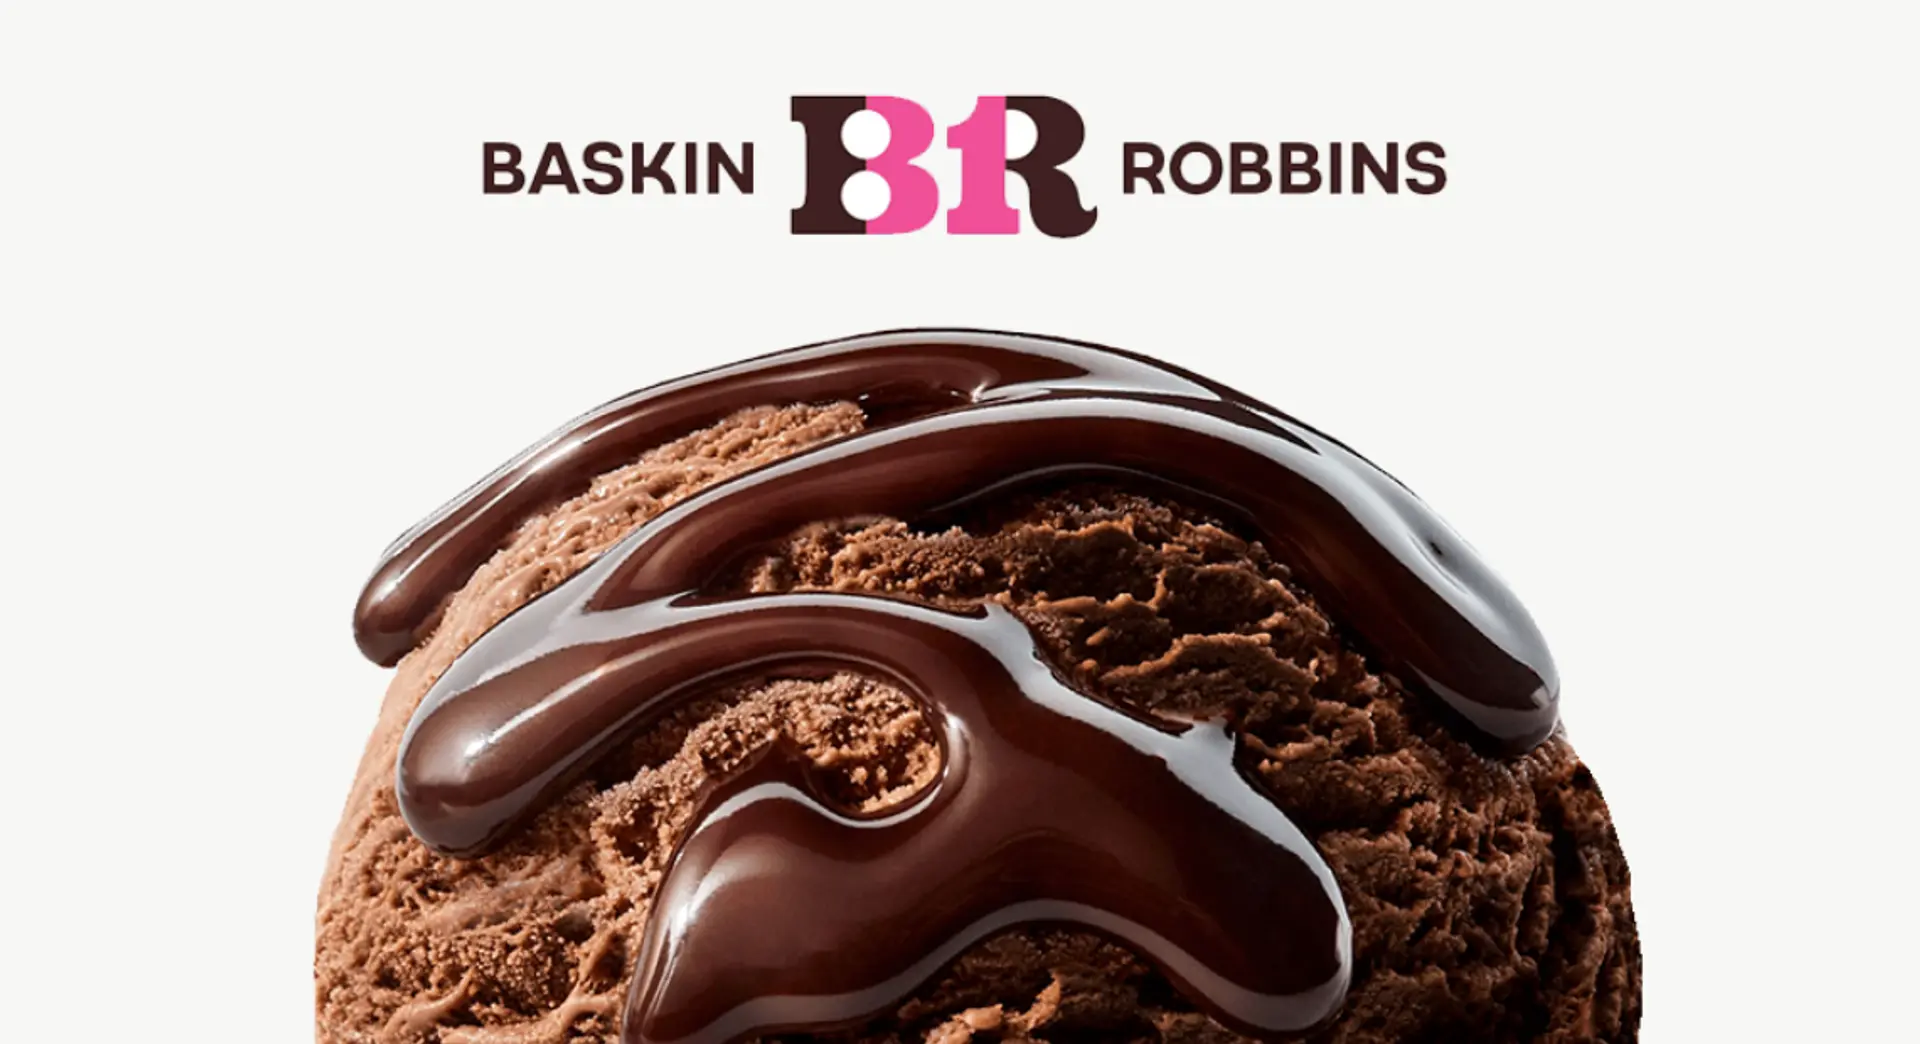 Baskin Robbins: Making Waves With Fresh Scoops And A New Logo